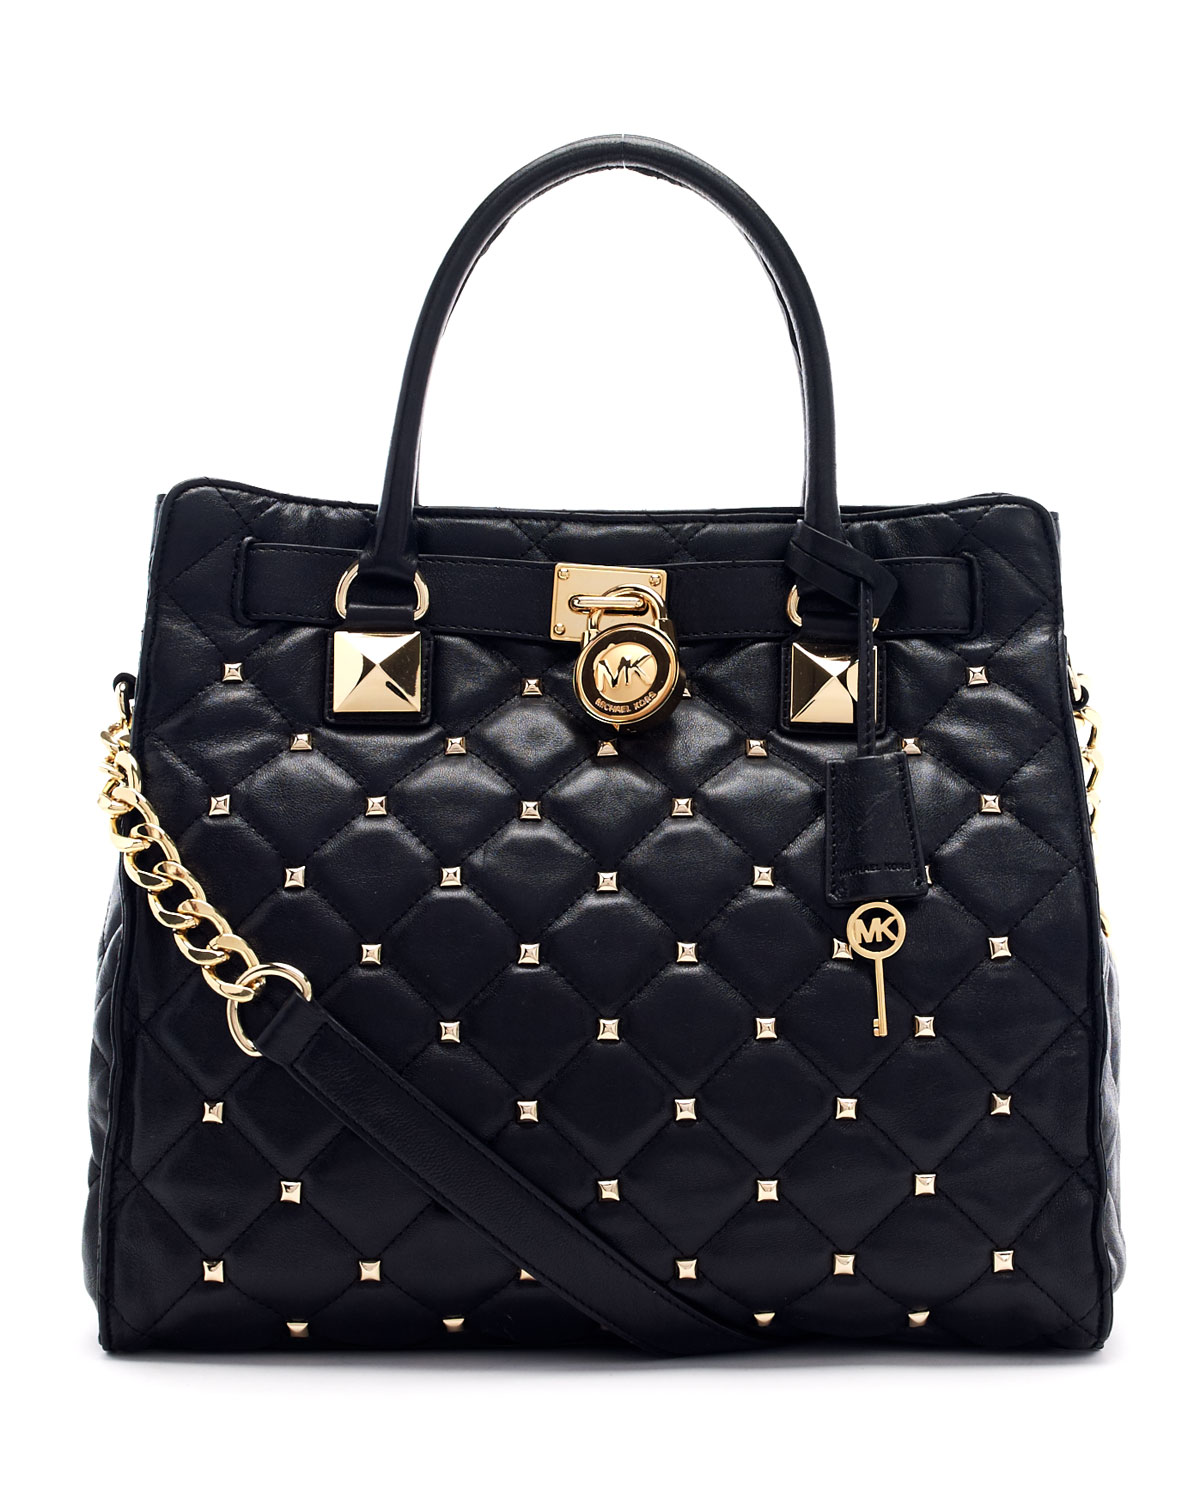 MICHAEL Michael Kors Large Hamilton Studded Quilted Tote Bag in Black - Lyst